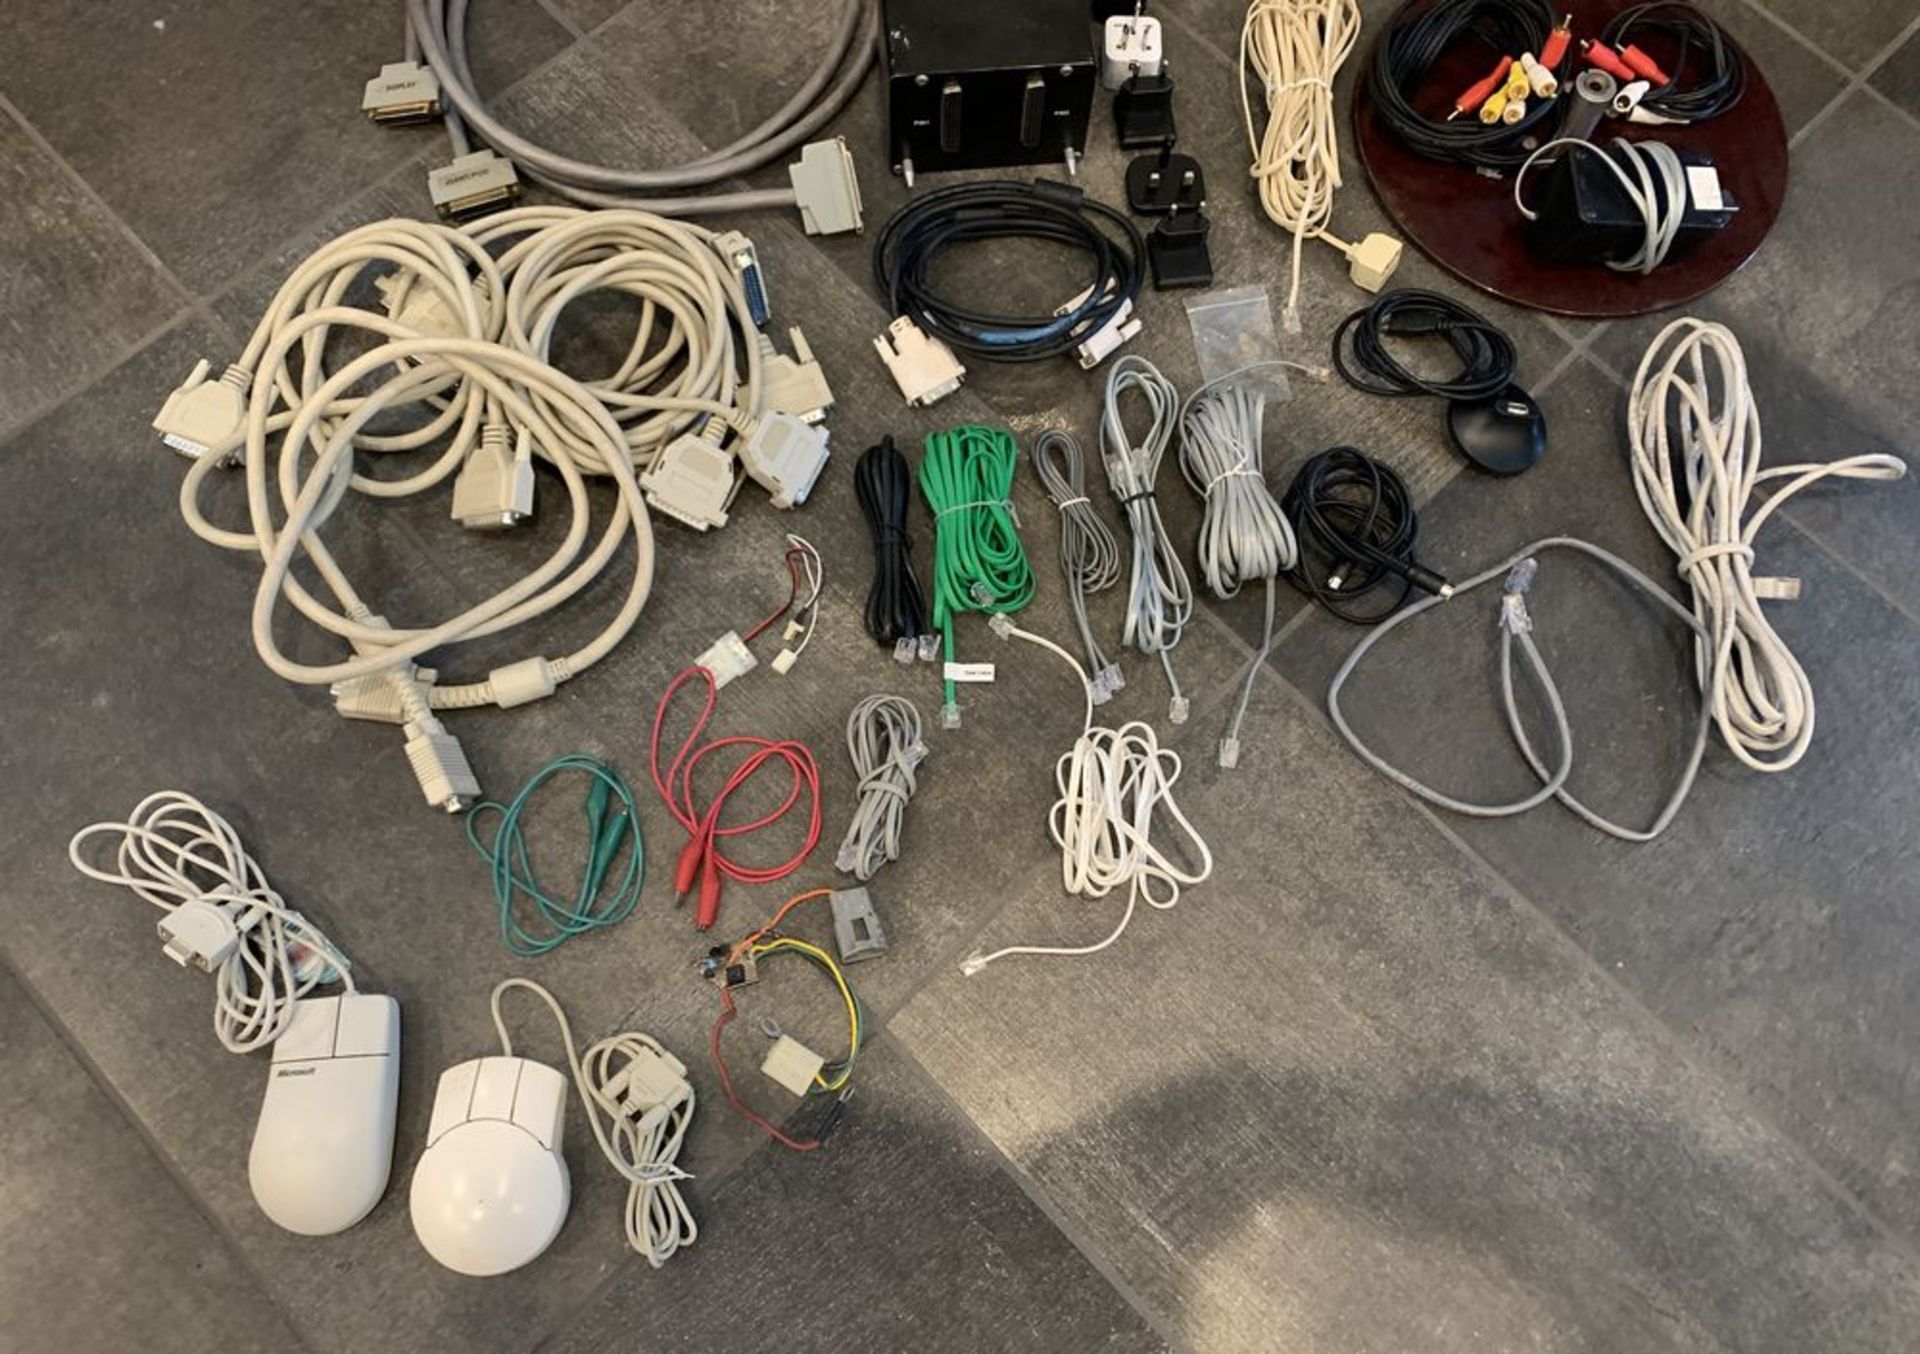 LARGE MIXED LOT OF ELECTRONICS, COMPUTER ITEMS CABLES AND MORE - Image 2 of 7